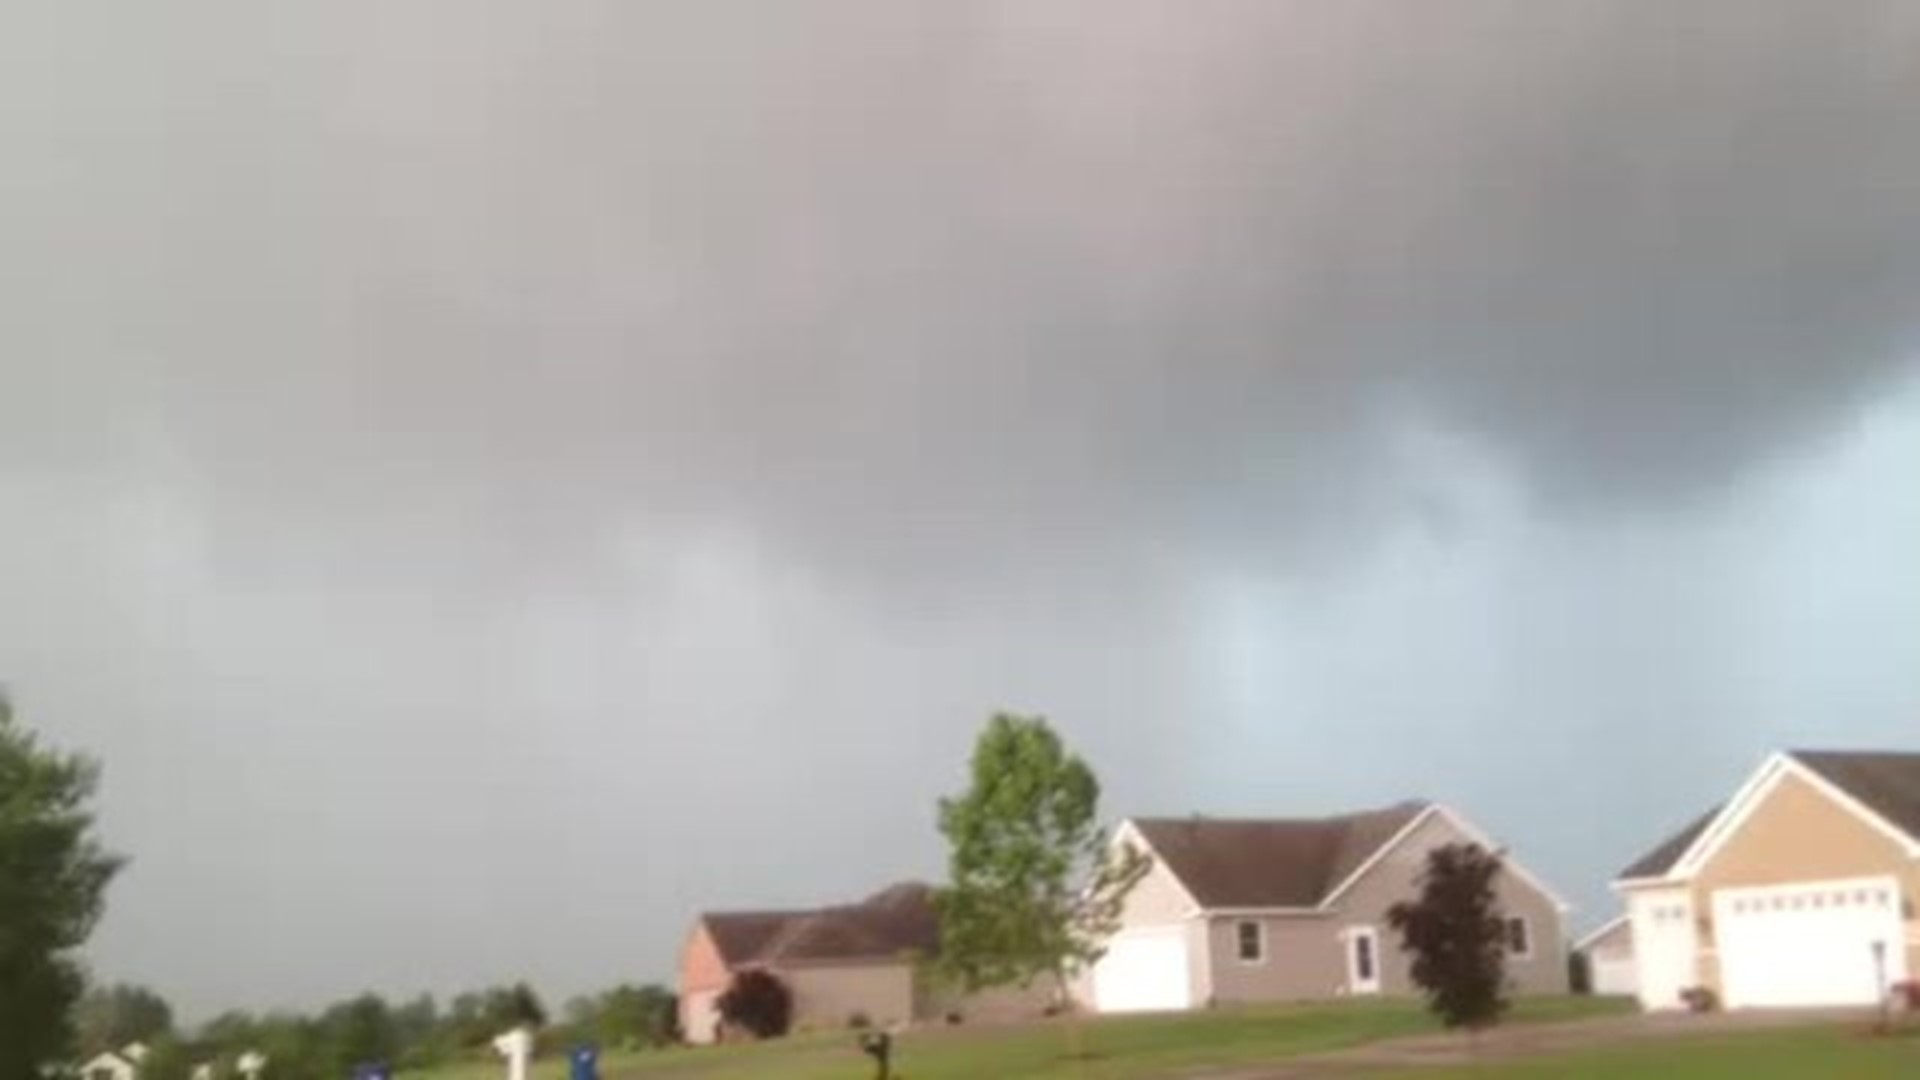 Muscatine possible funnel cloud forming 6-24-13 video from Mitchell Mertes